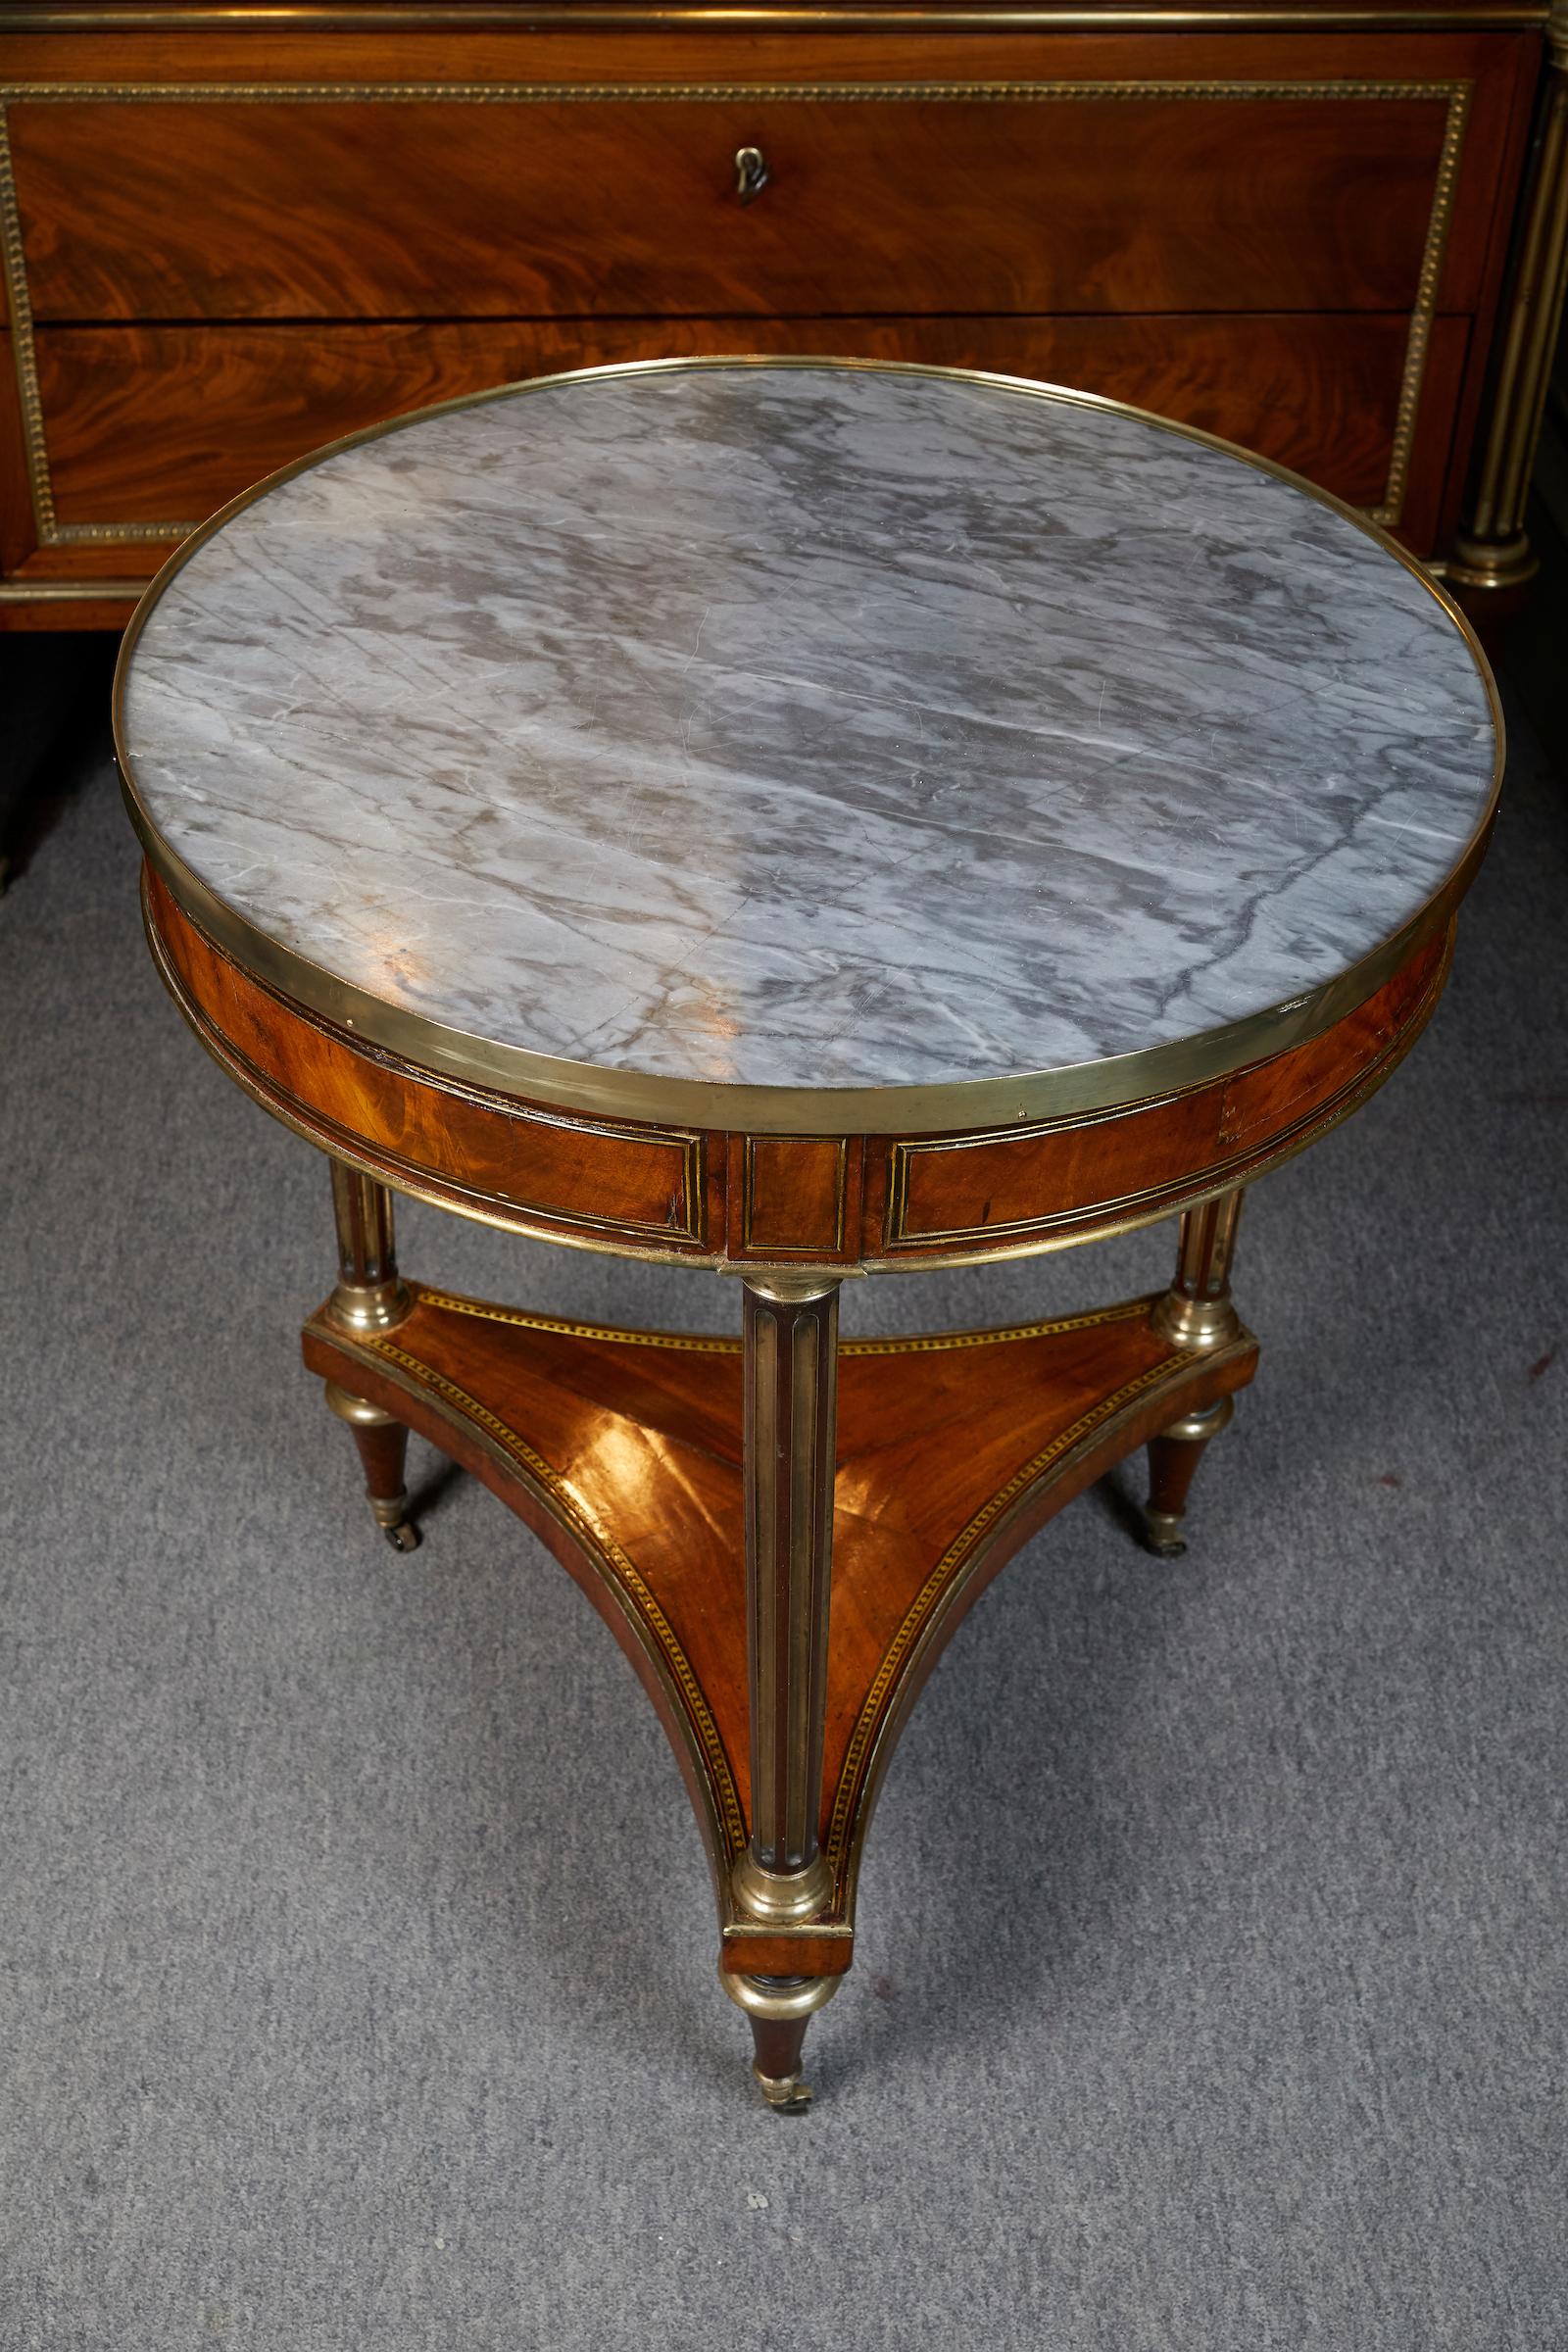 Elegant mahogany Louis XVI period gueridon with grey St Anne marble top resting on castors.